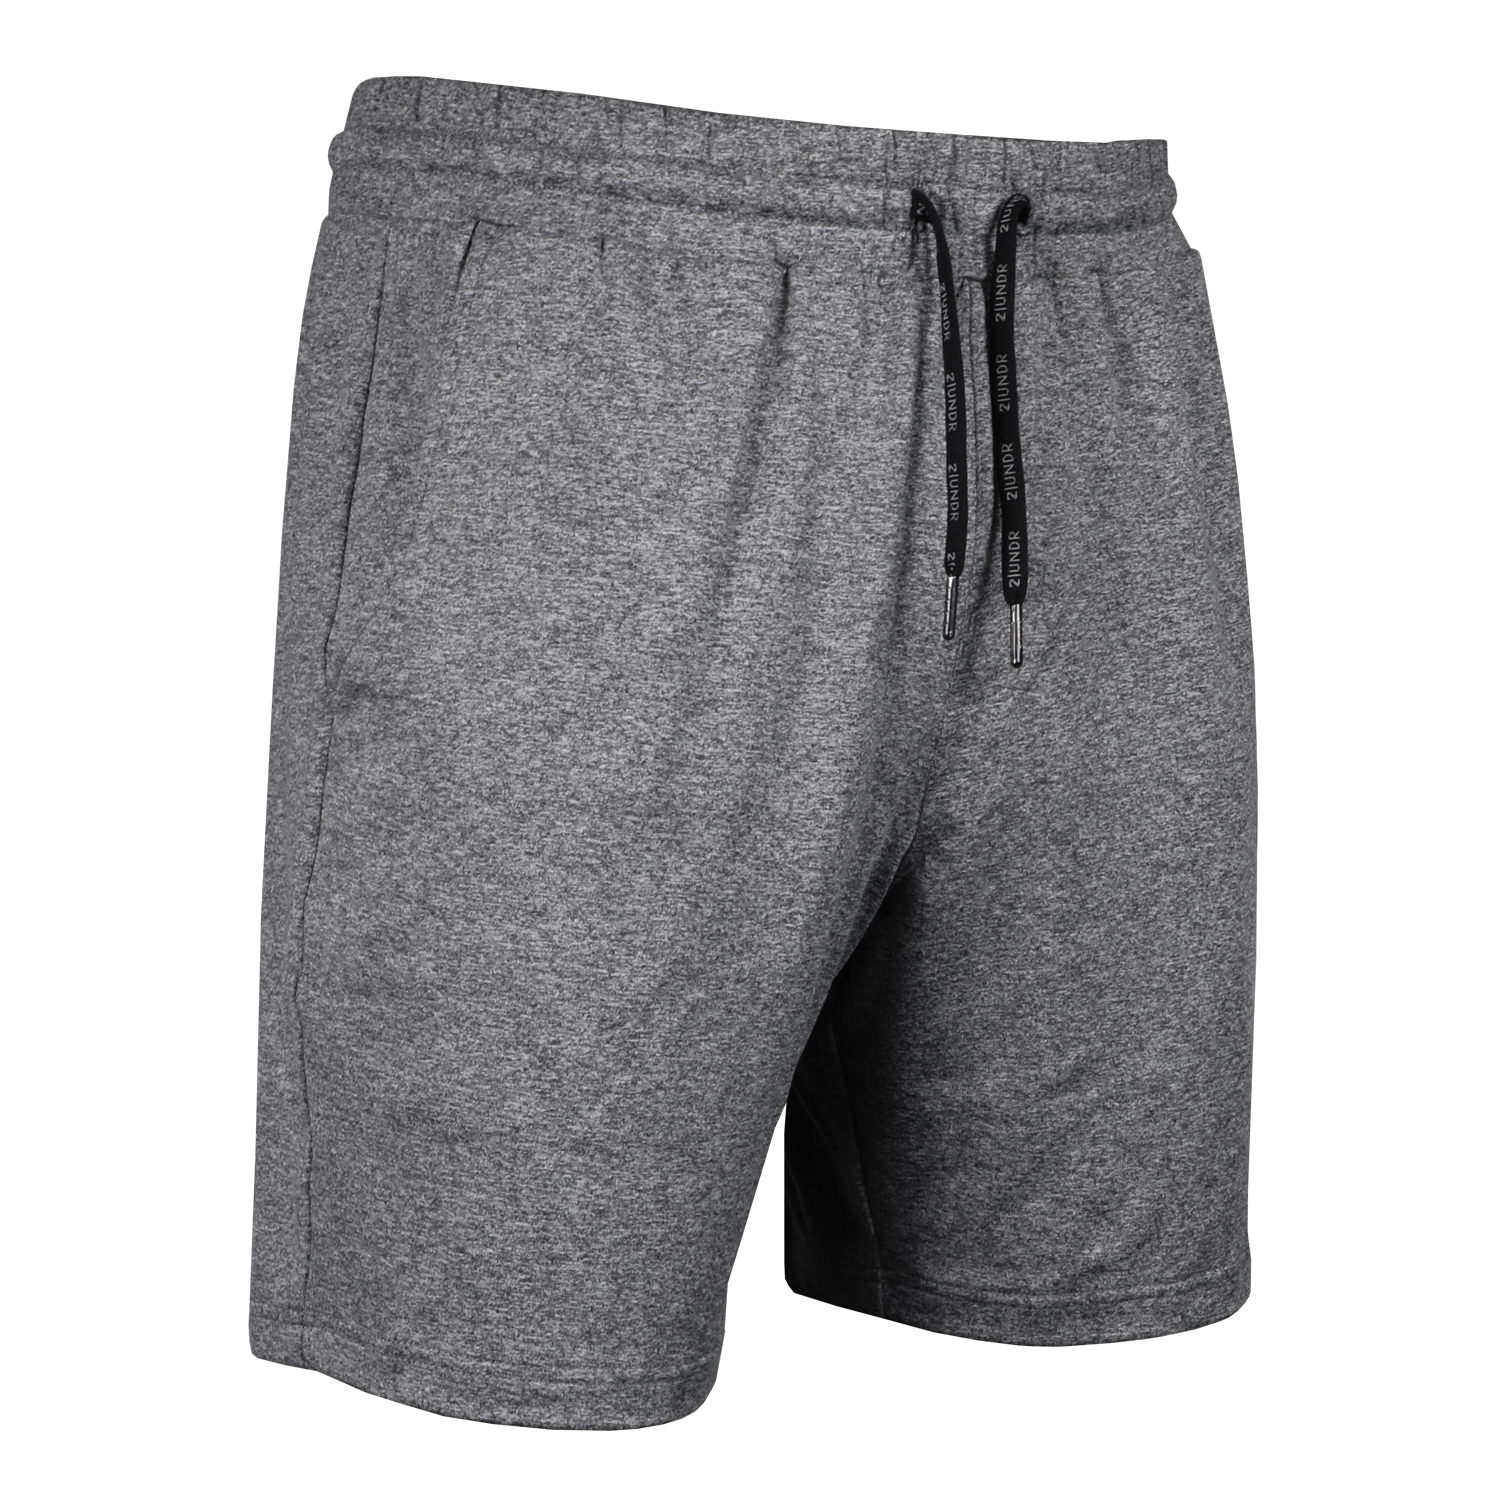 Short Game Time 2Undr -  Static grey